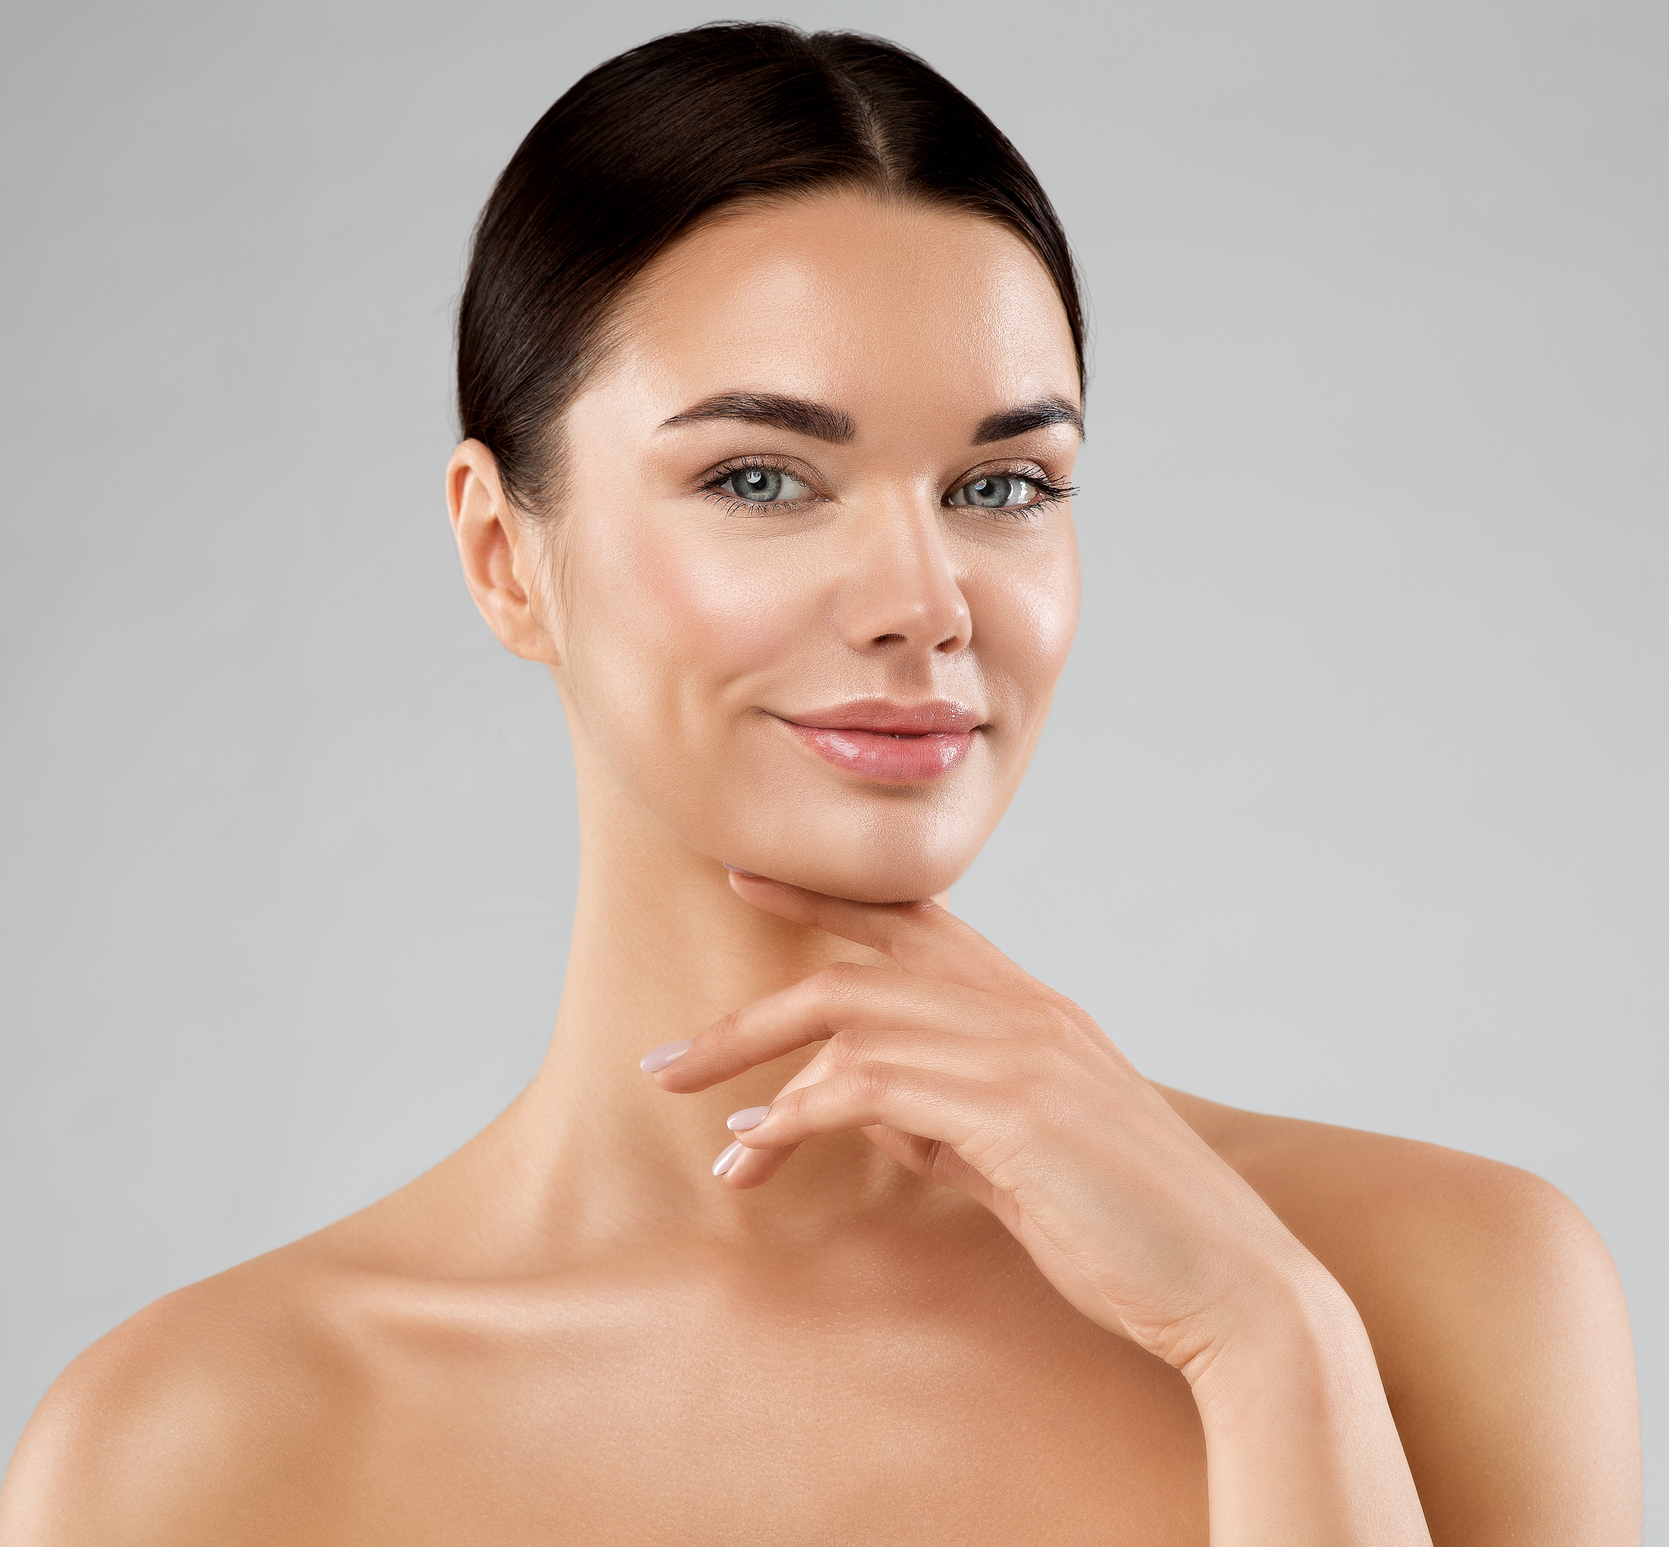 Acne Treatment in Akron, OH